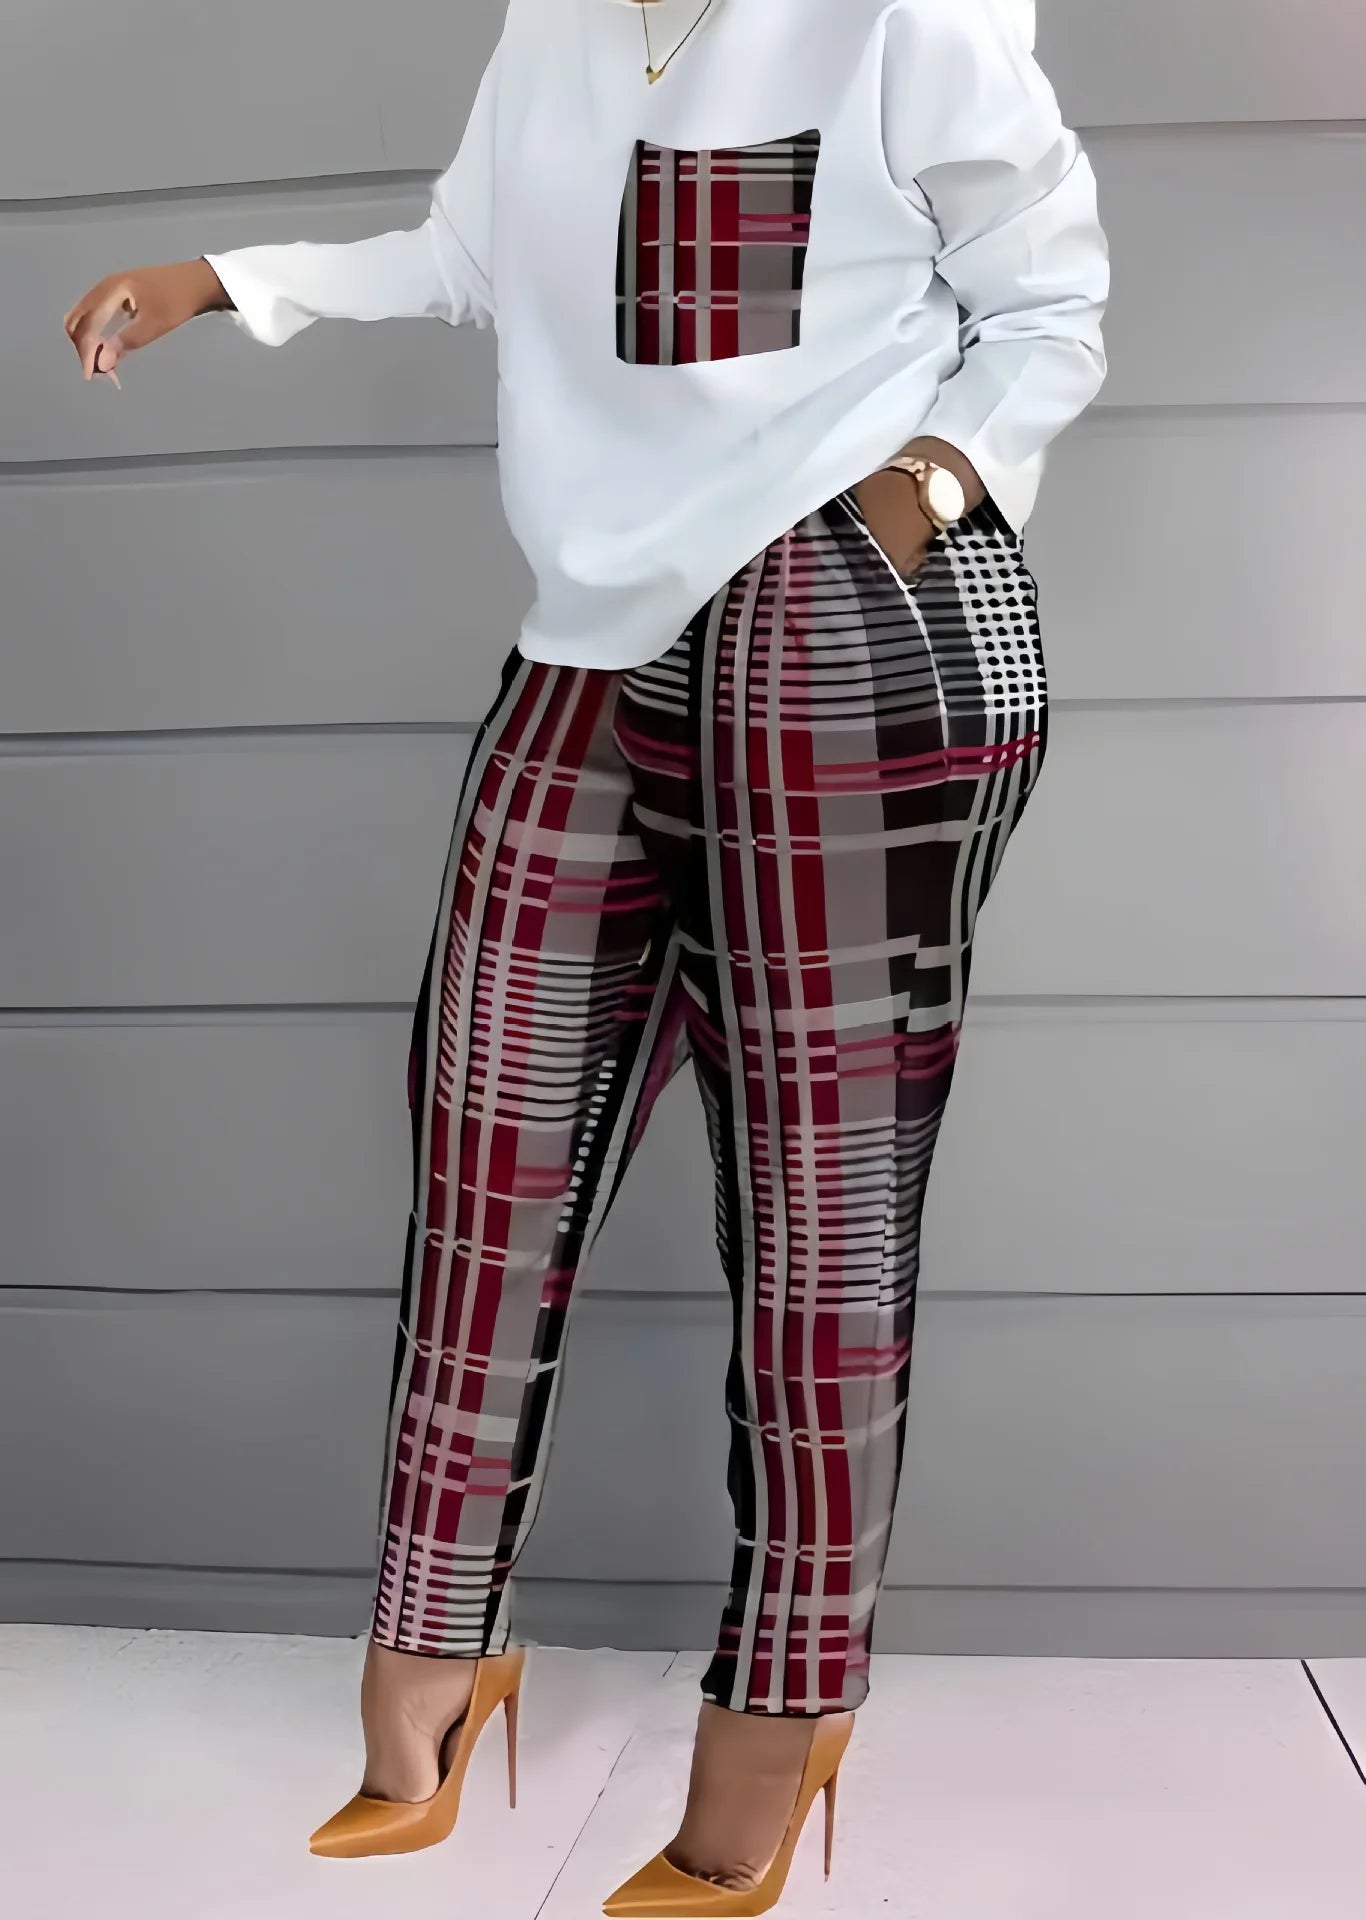 2 Piece Sets Womens Outfits 2023 Autumn Winter New Print Long Sleeve Top & Fashion Pants Set Casual Suits Streetwear Y2k Clothes - Essential Love Store